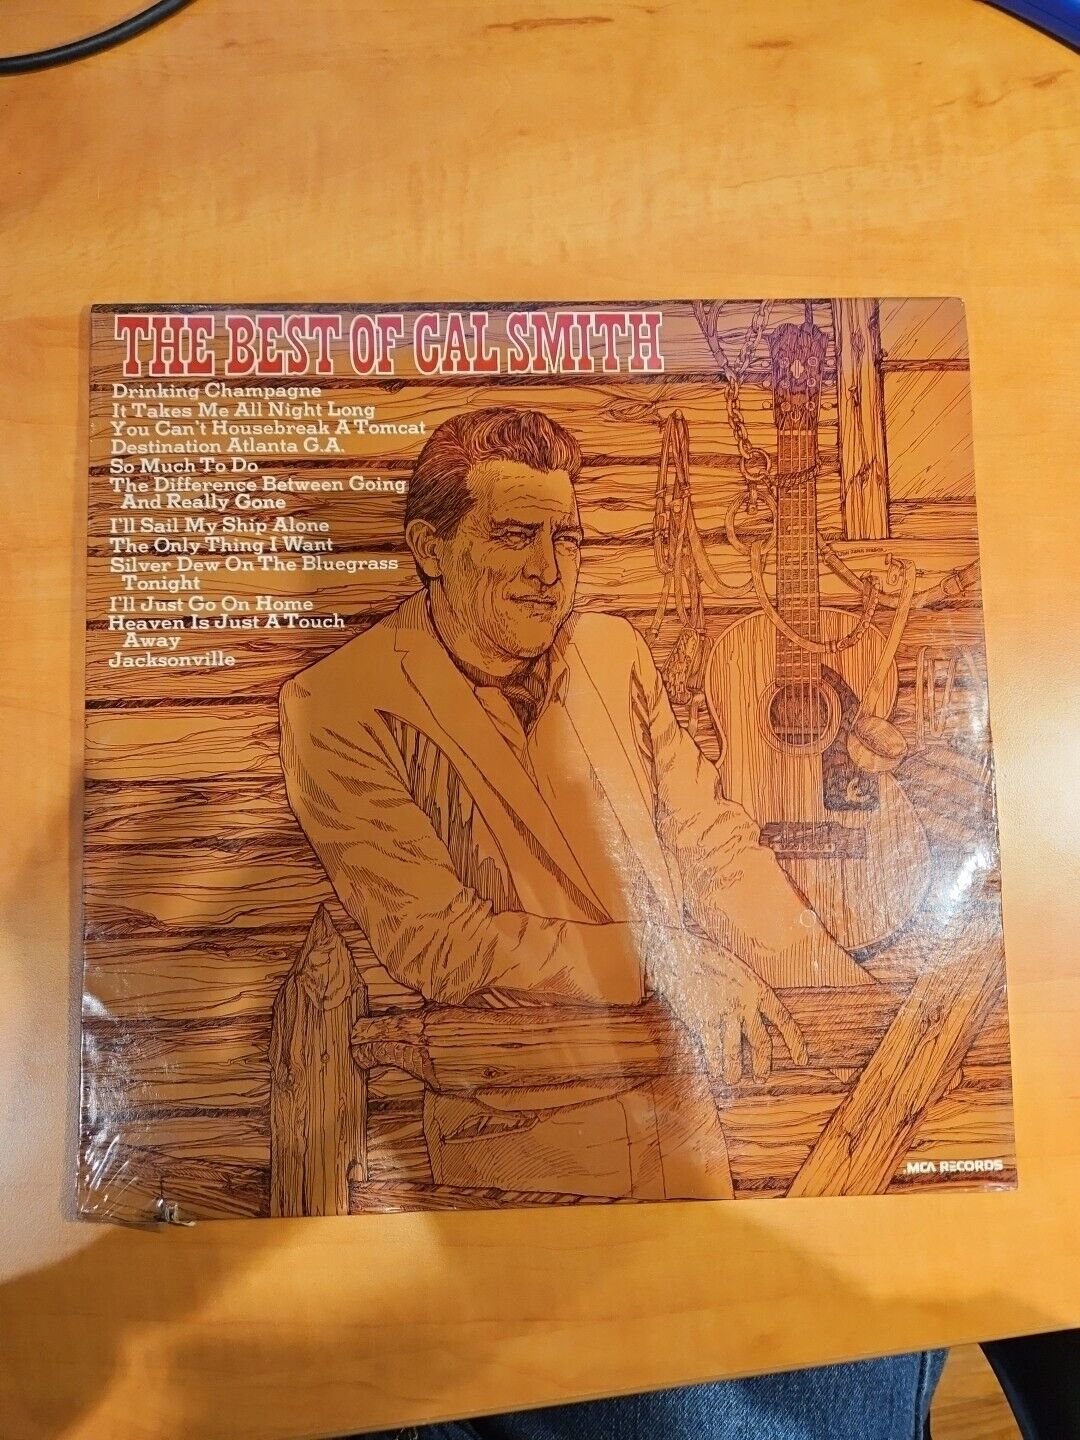 ALBUM LP, CAL SMITH, THE BEST OF CAL SMITH, NEW SEALED, NOTCHED